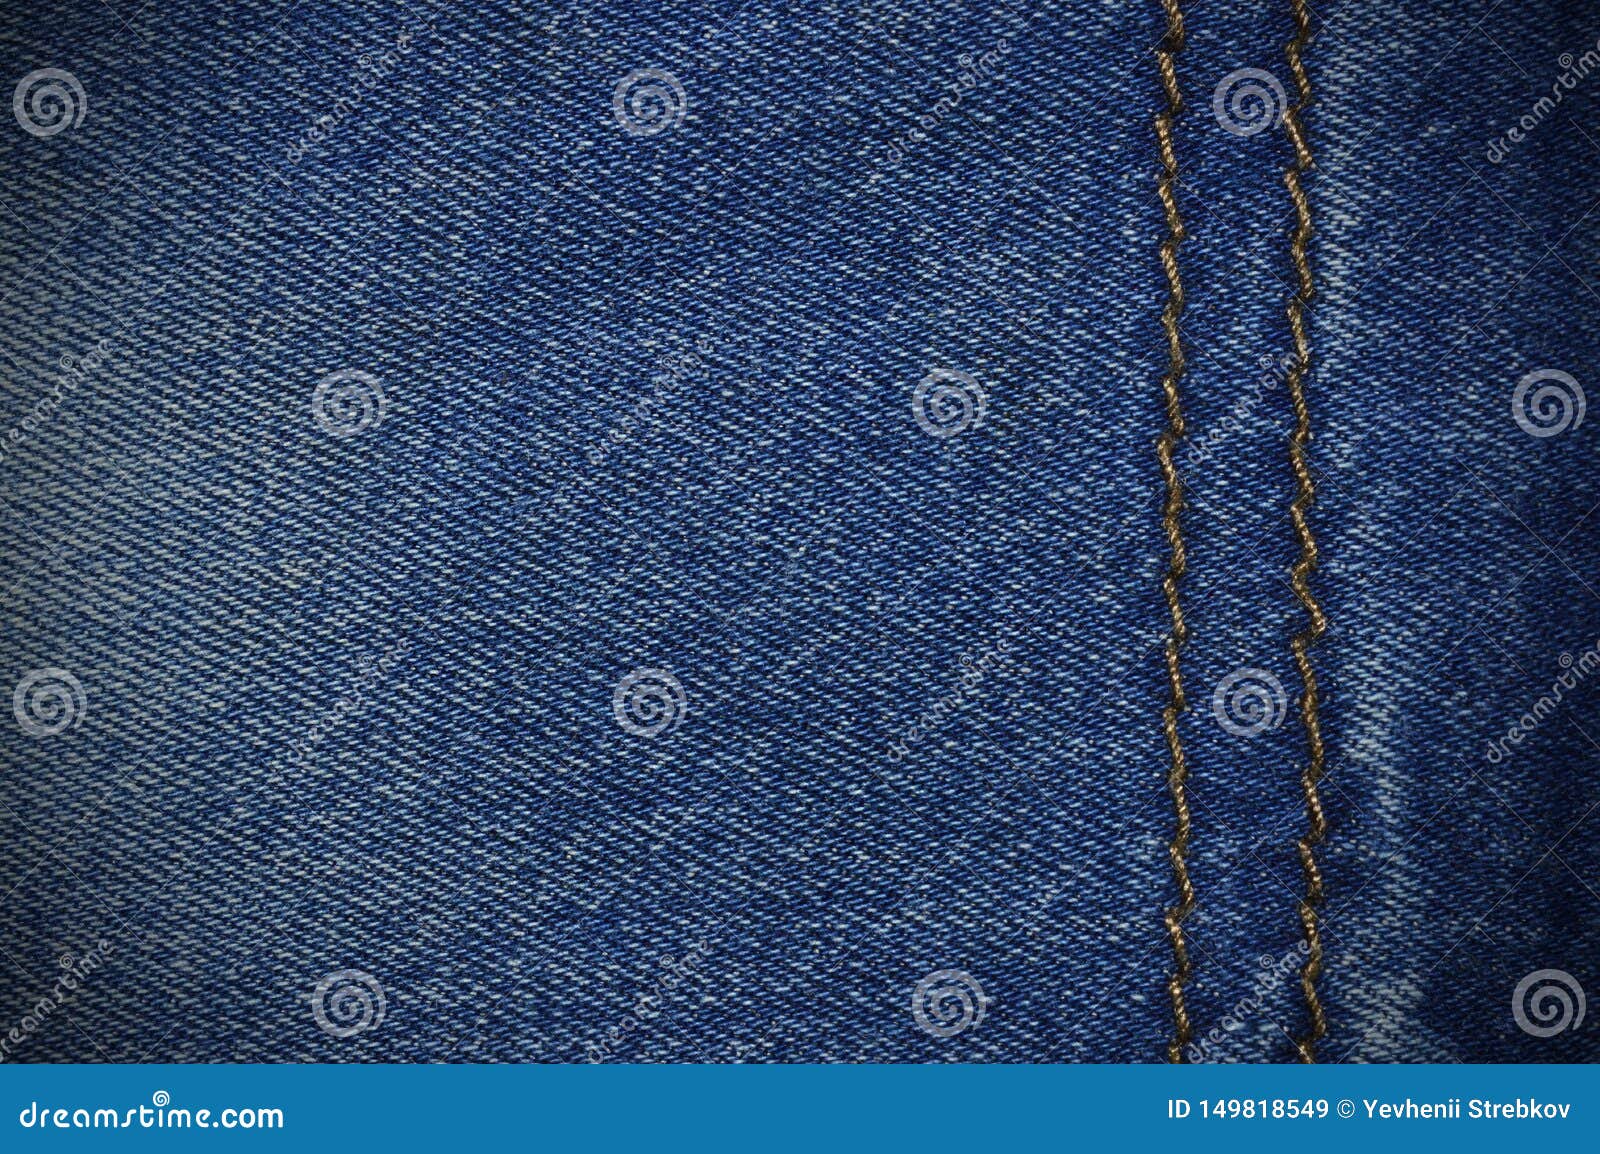 Blue Denim Texture with Seam Closeup Stock Image - Image of casual ...